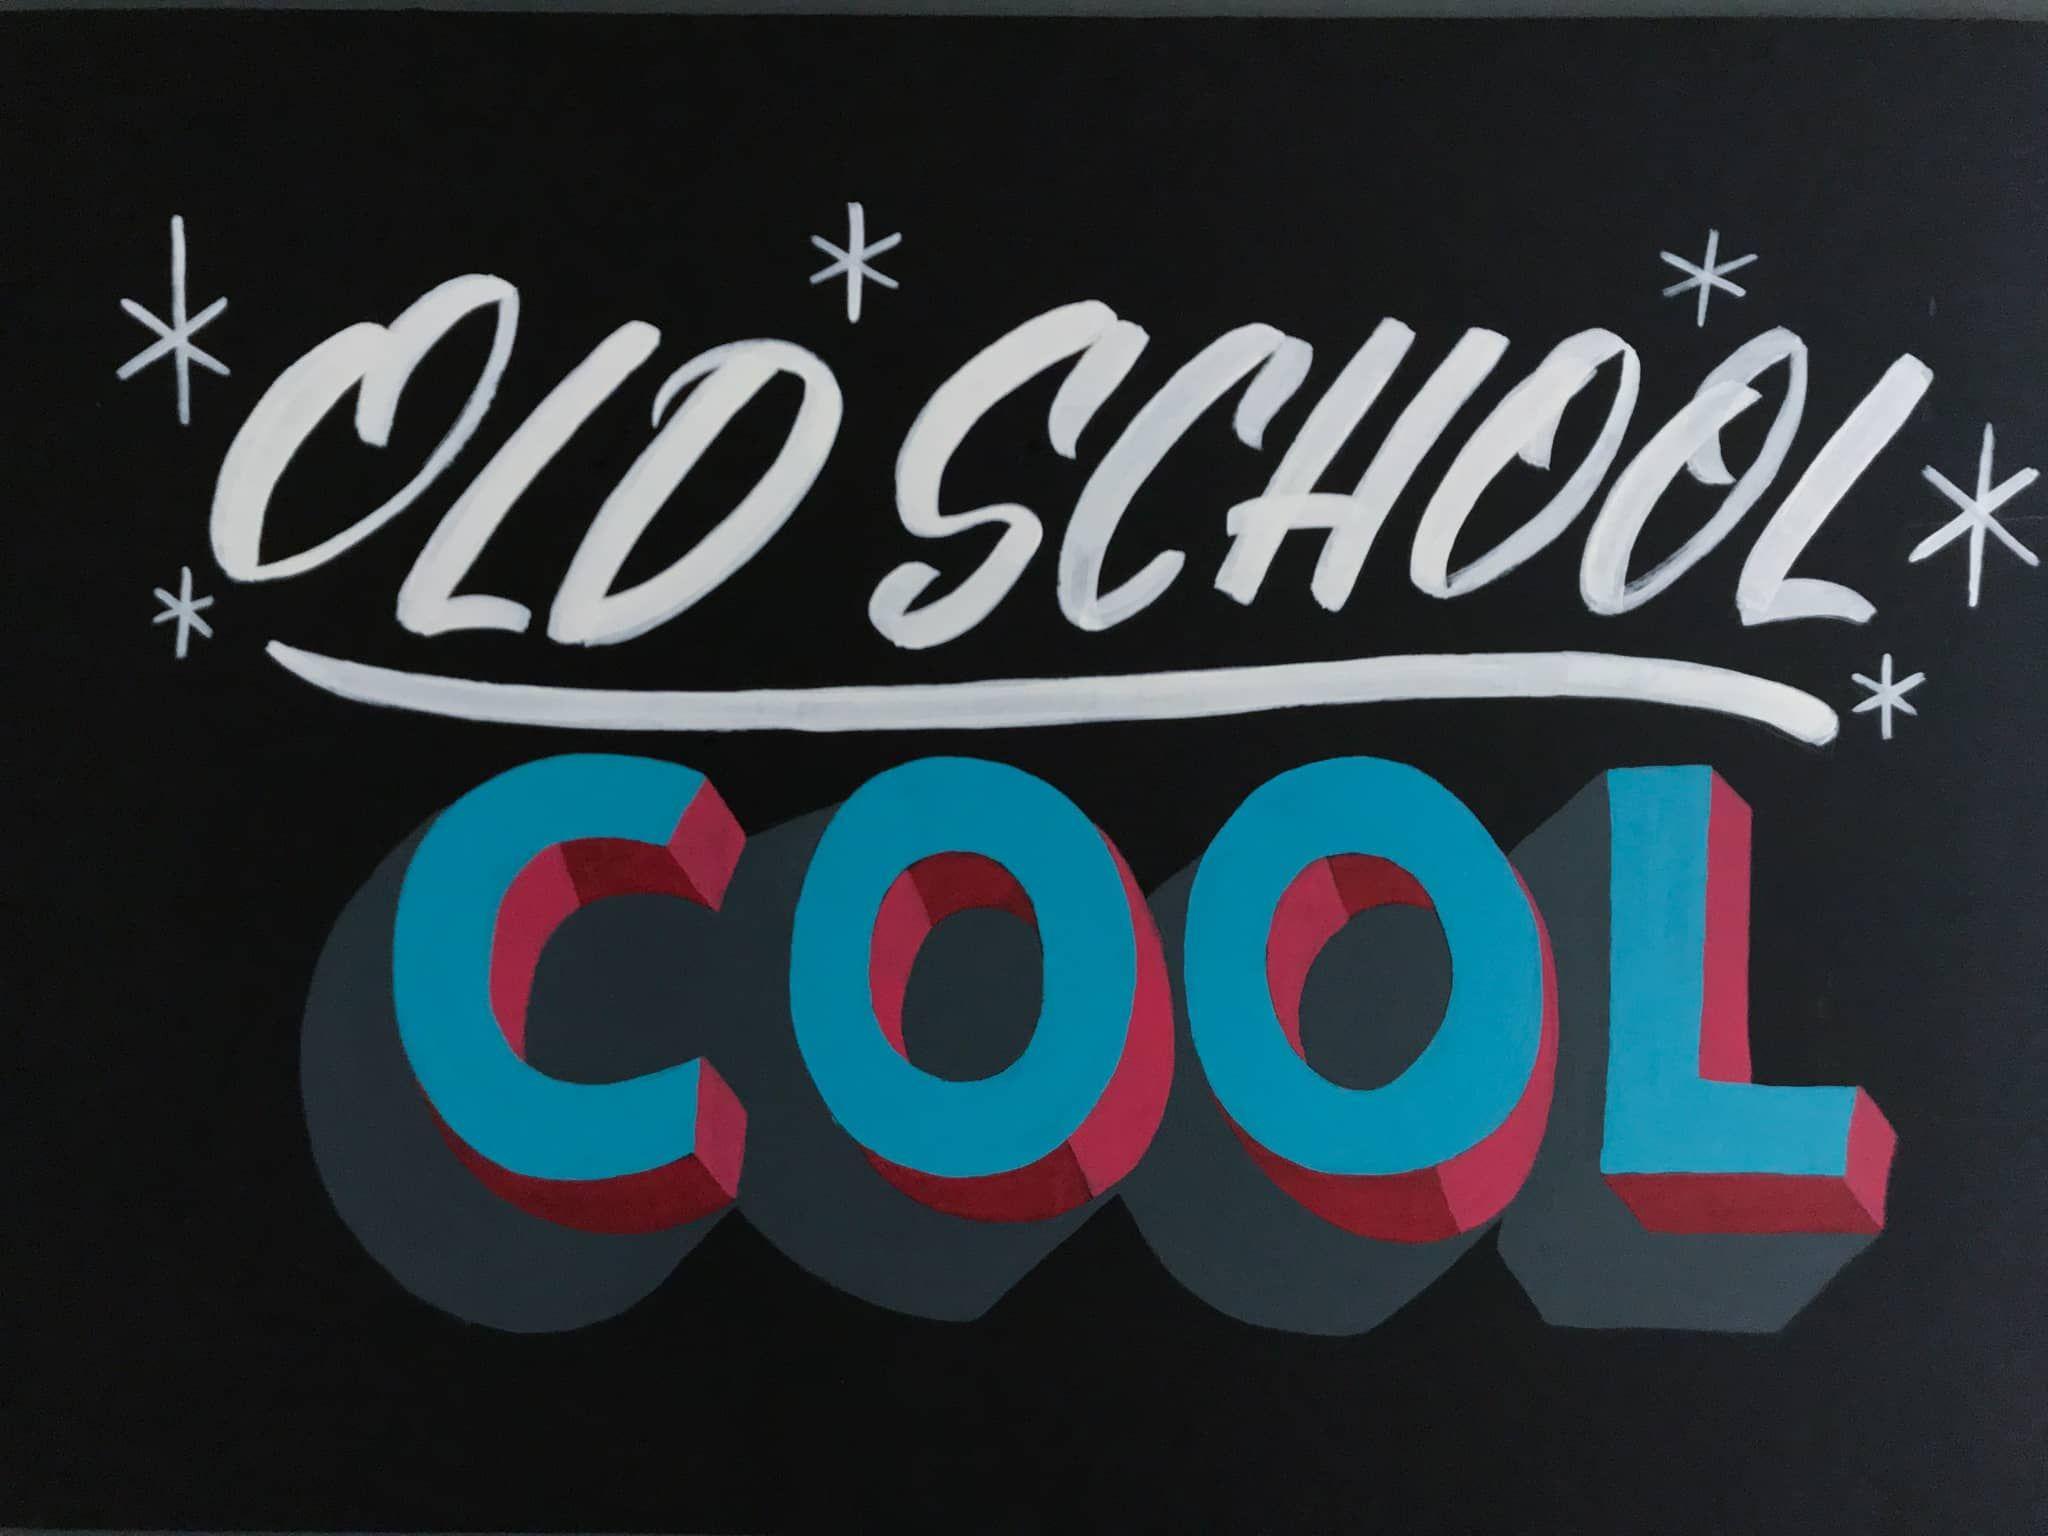 Cool Yelp Logo - Old School Cool hand painted sign by Hillery Powers for Yelp Orlando ...